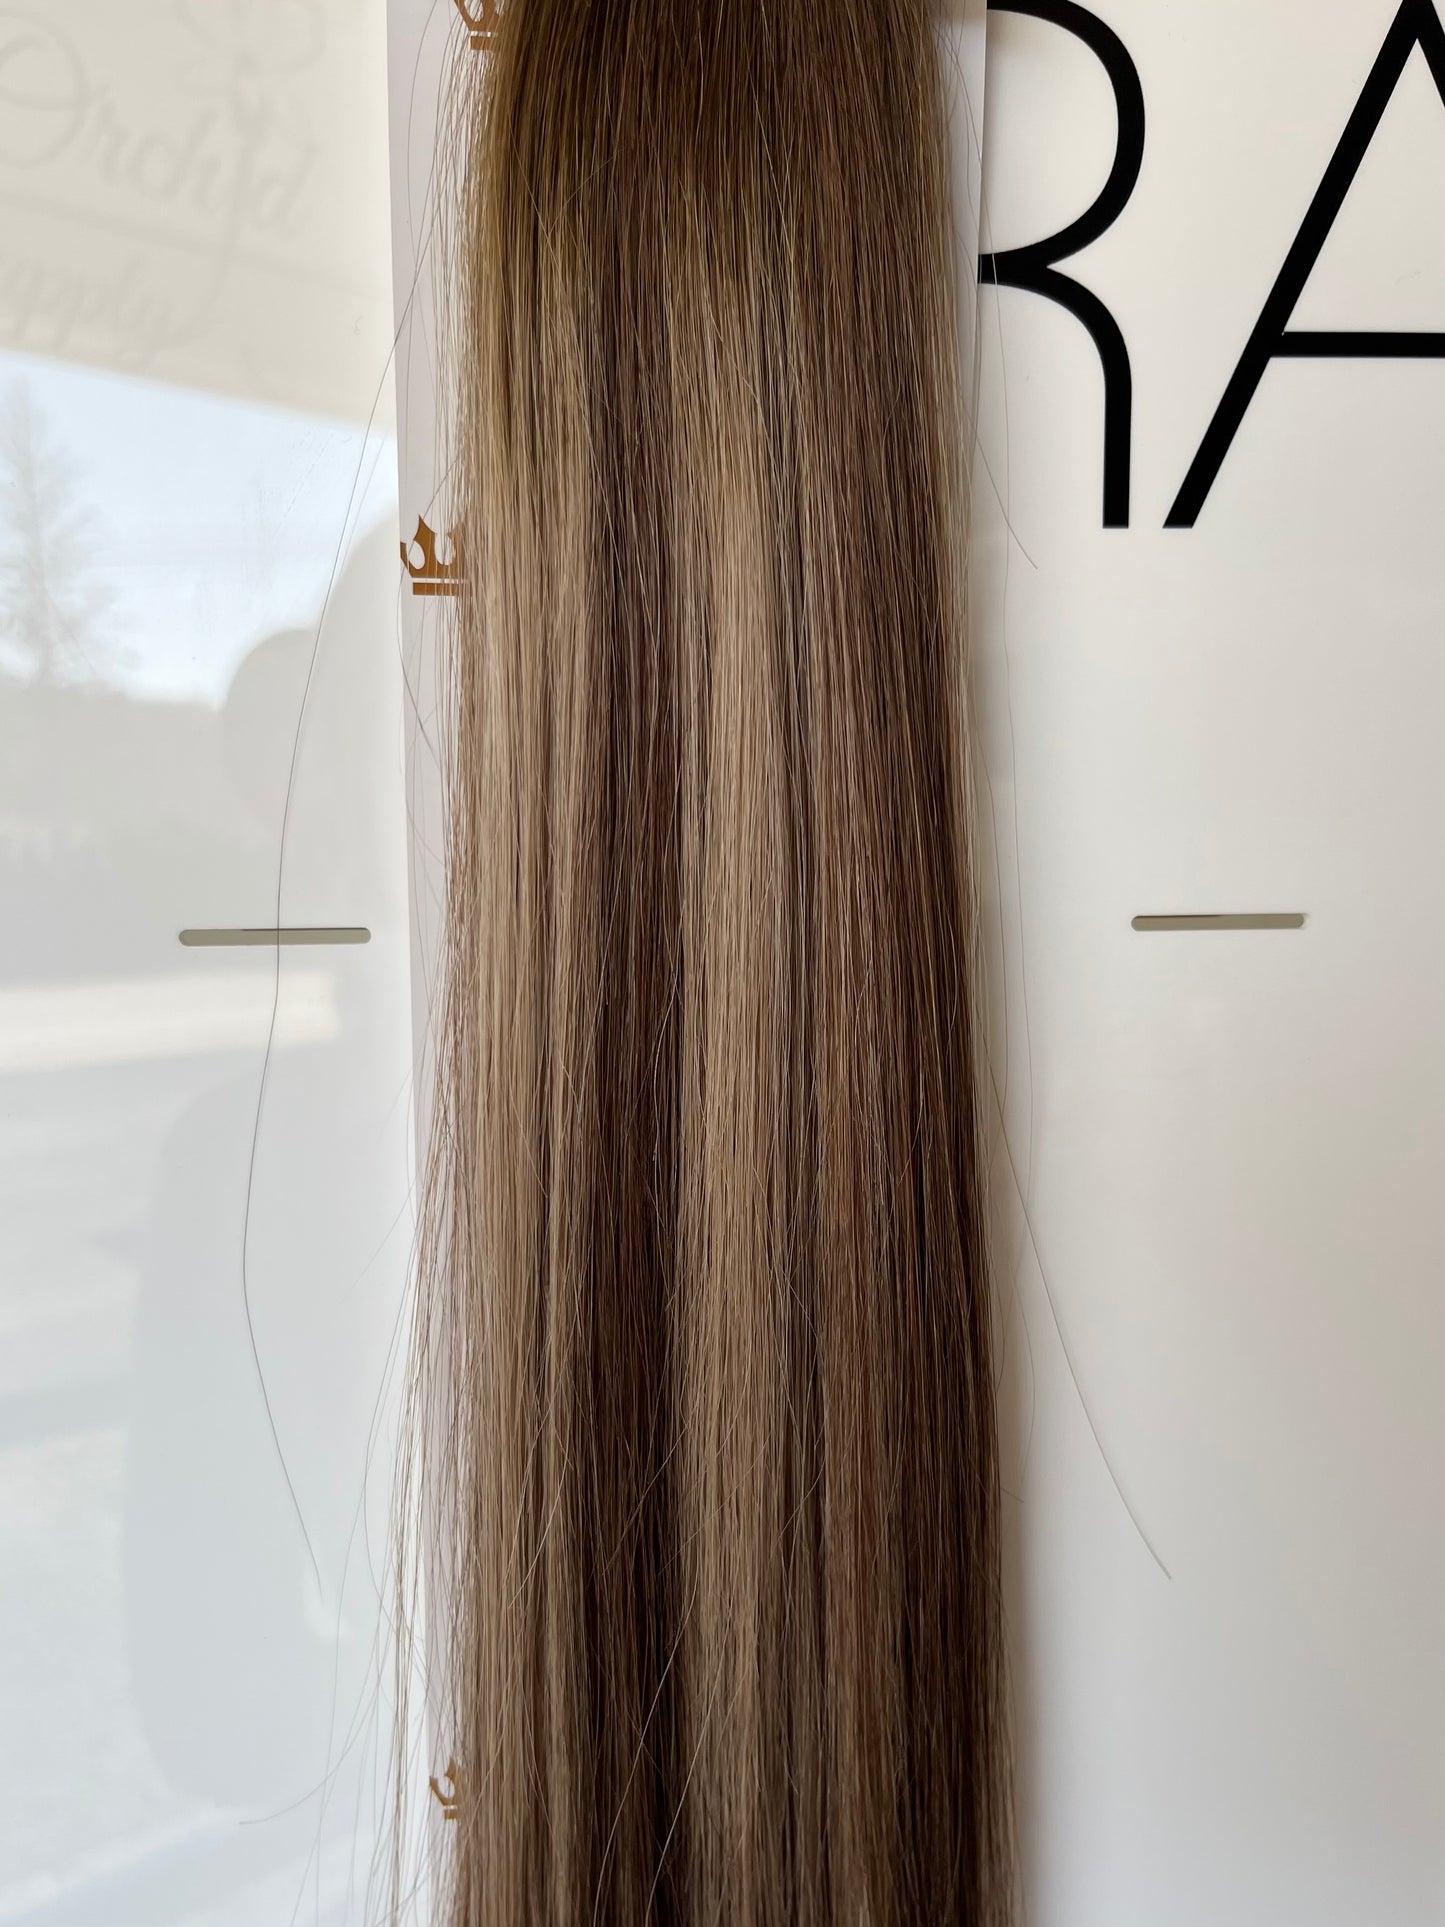 RETAIL TAPE IN EXTENSIONS - BALAYAGE - TIGERS EYE